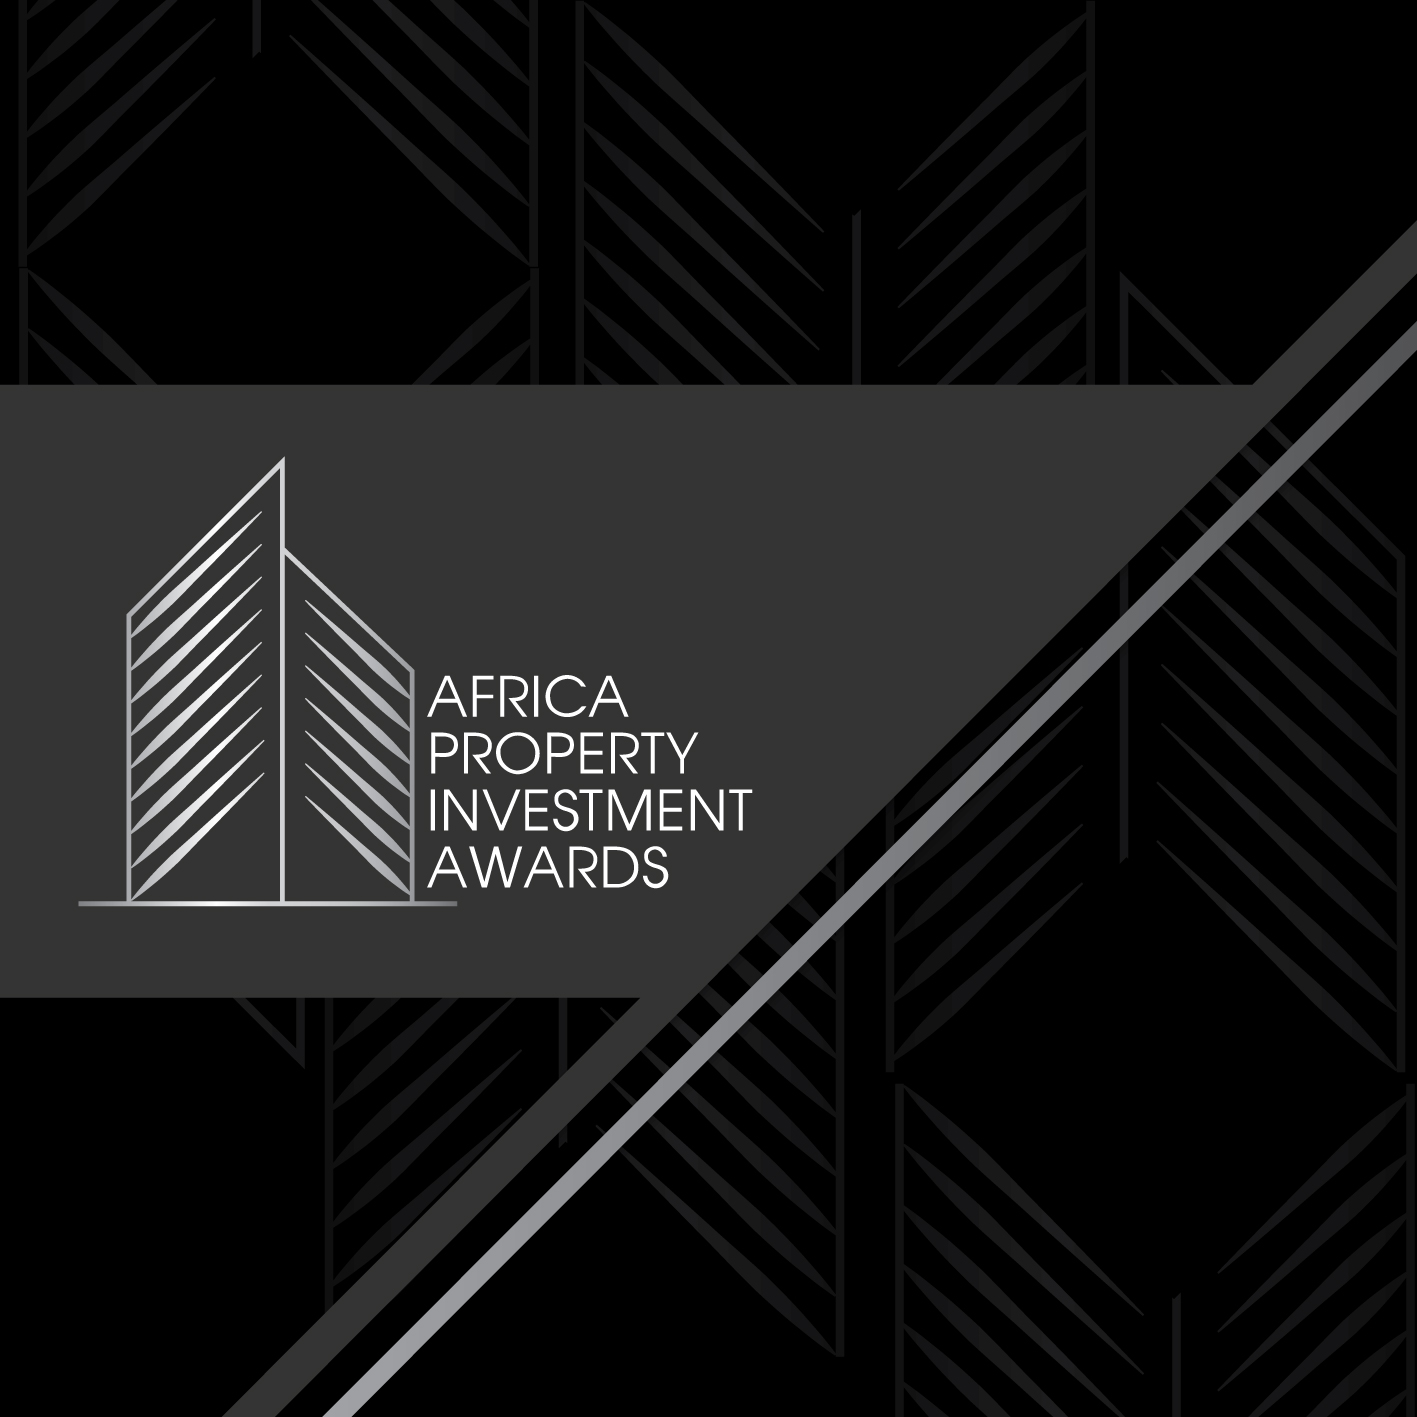 Entries Open for 2017 Africa Property Investment Awards